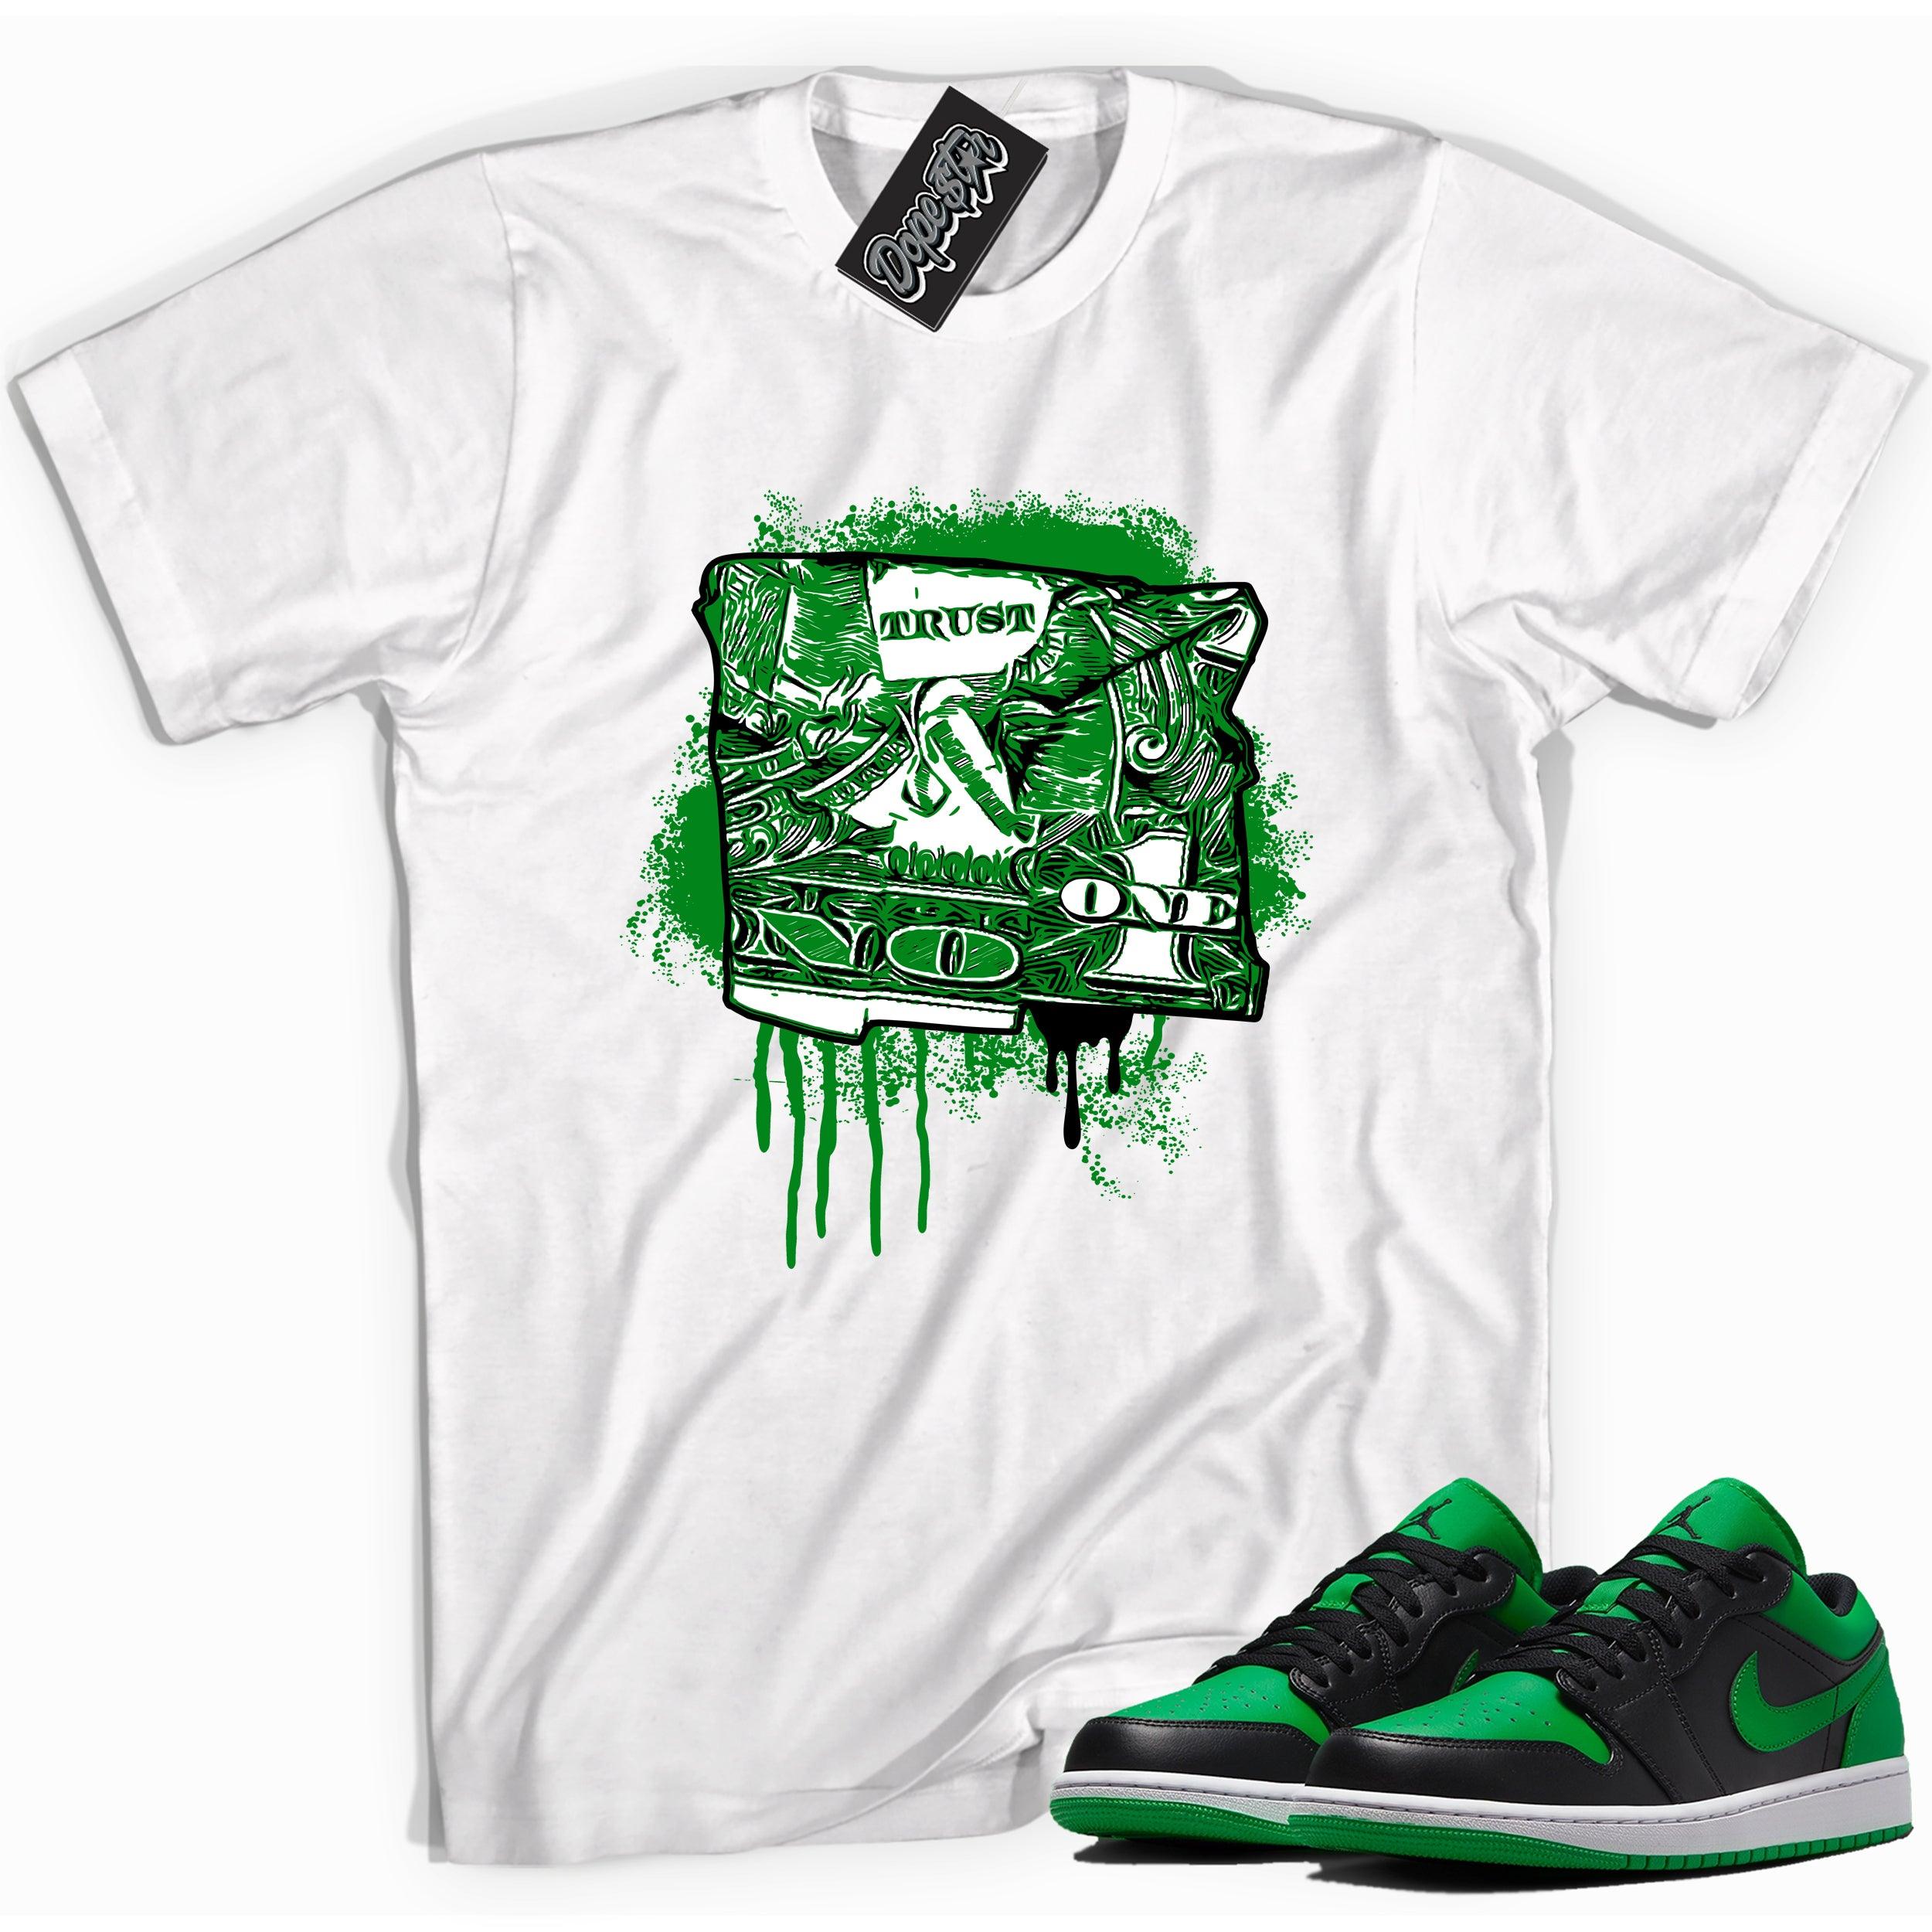 Cool white graphic tee with 'trust no one dollar' print, that perfectly matches Air Jordan 1 Low Lucky Green sneakers